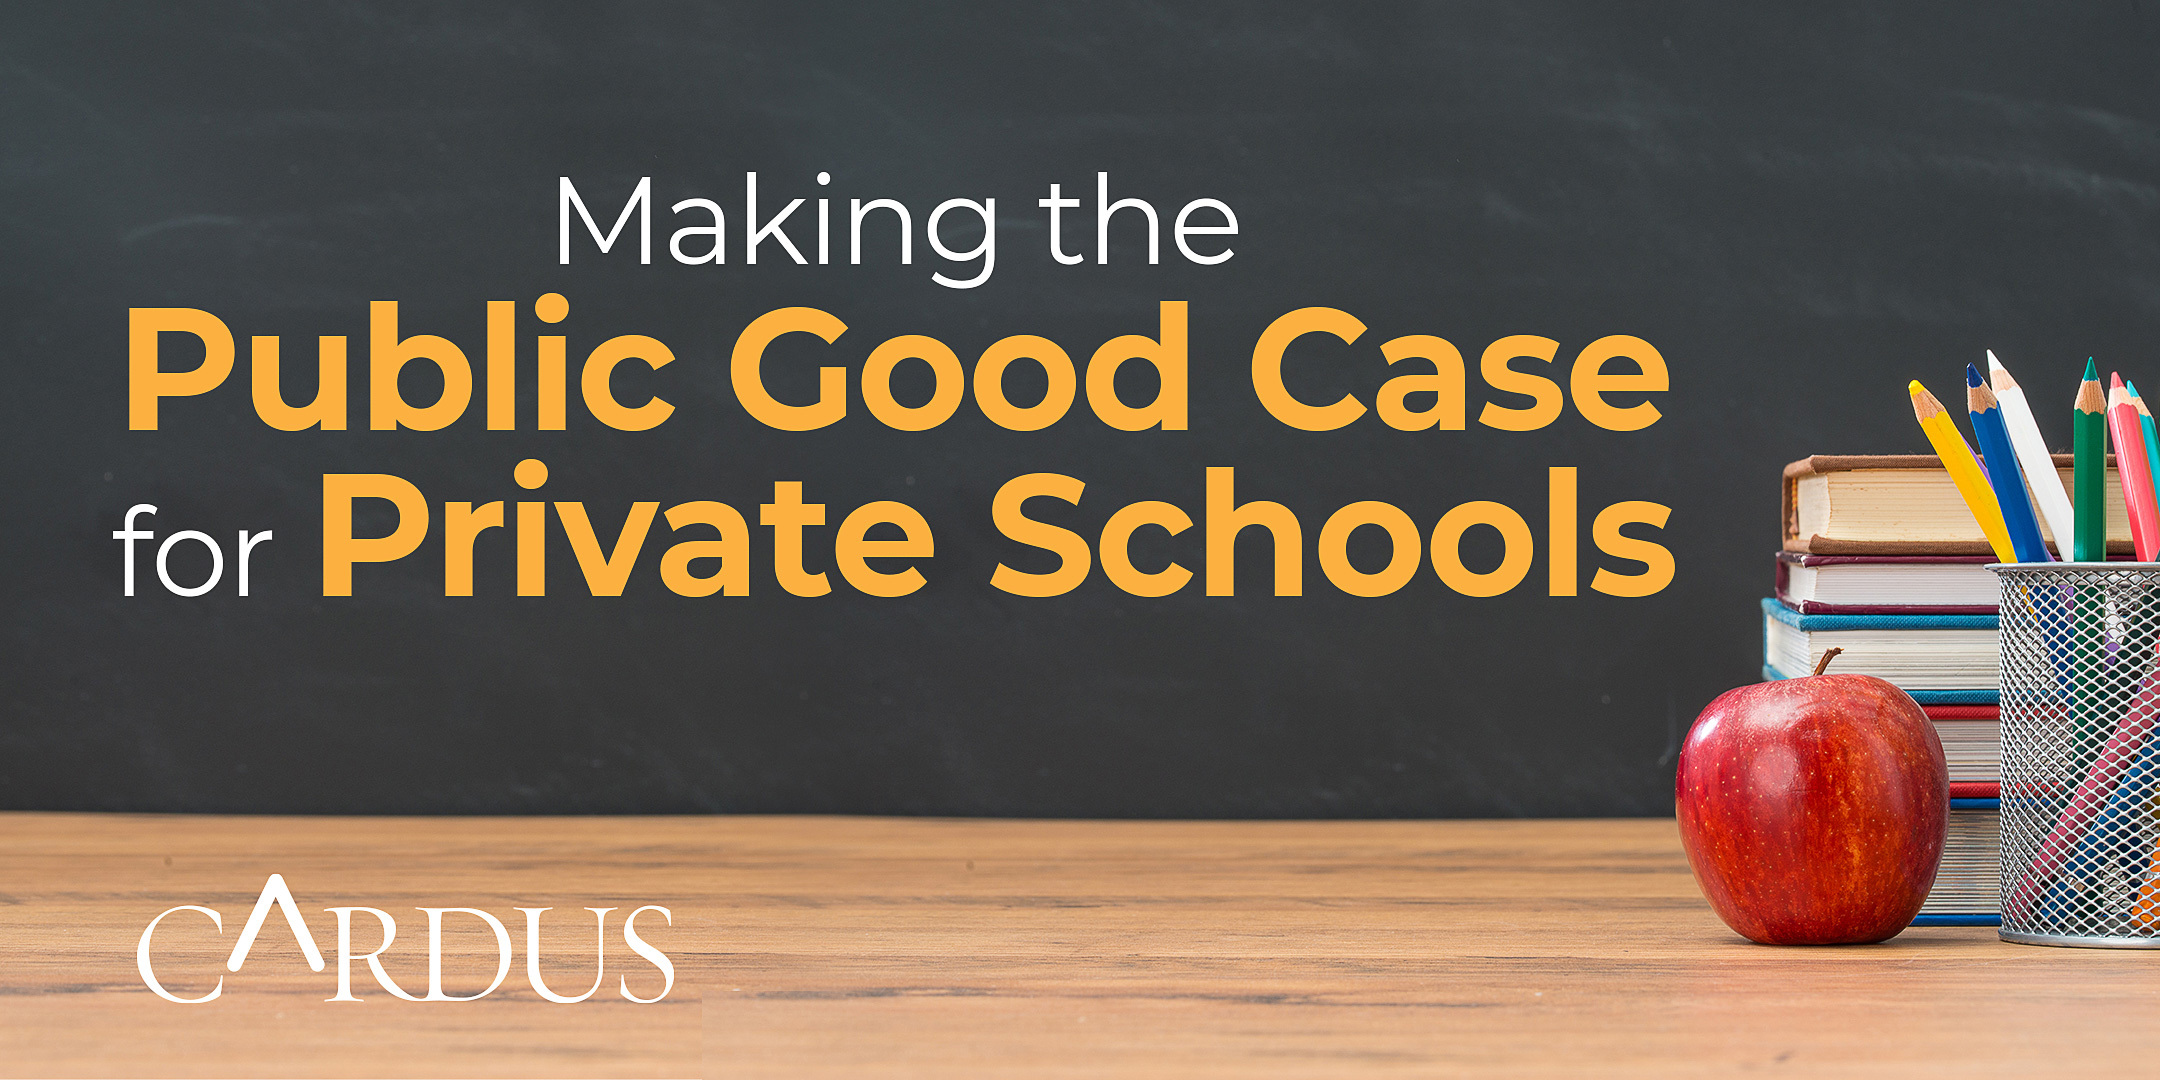 Making the Public Good Case for Private Schools